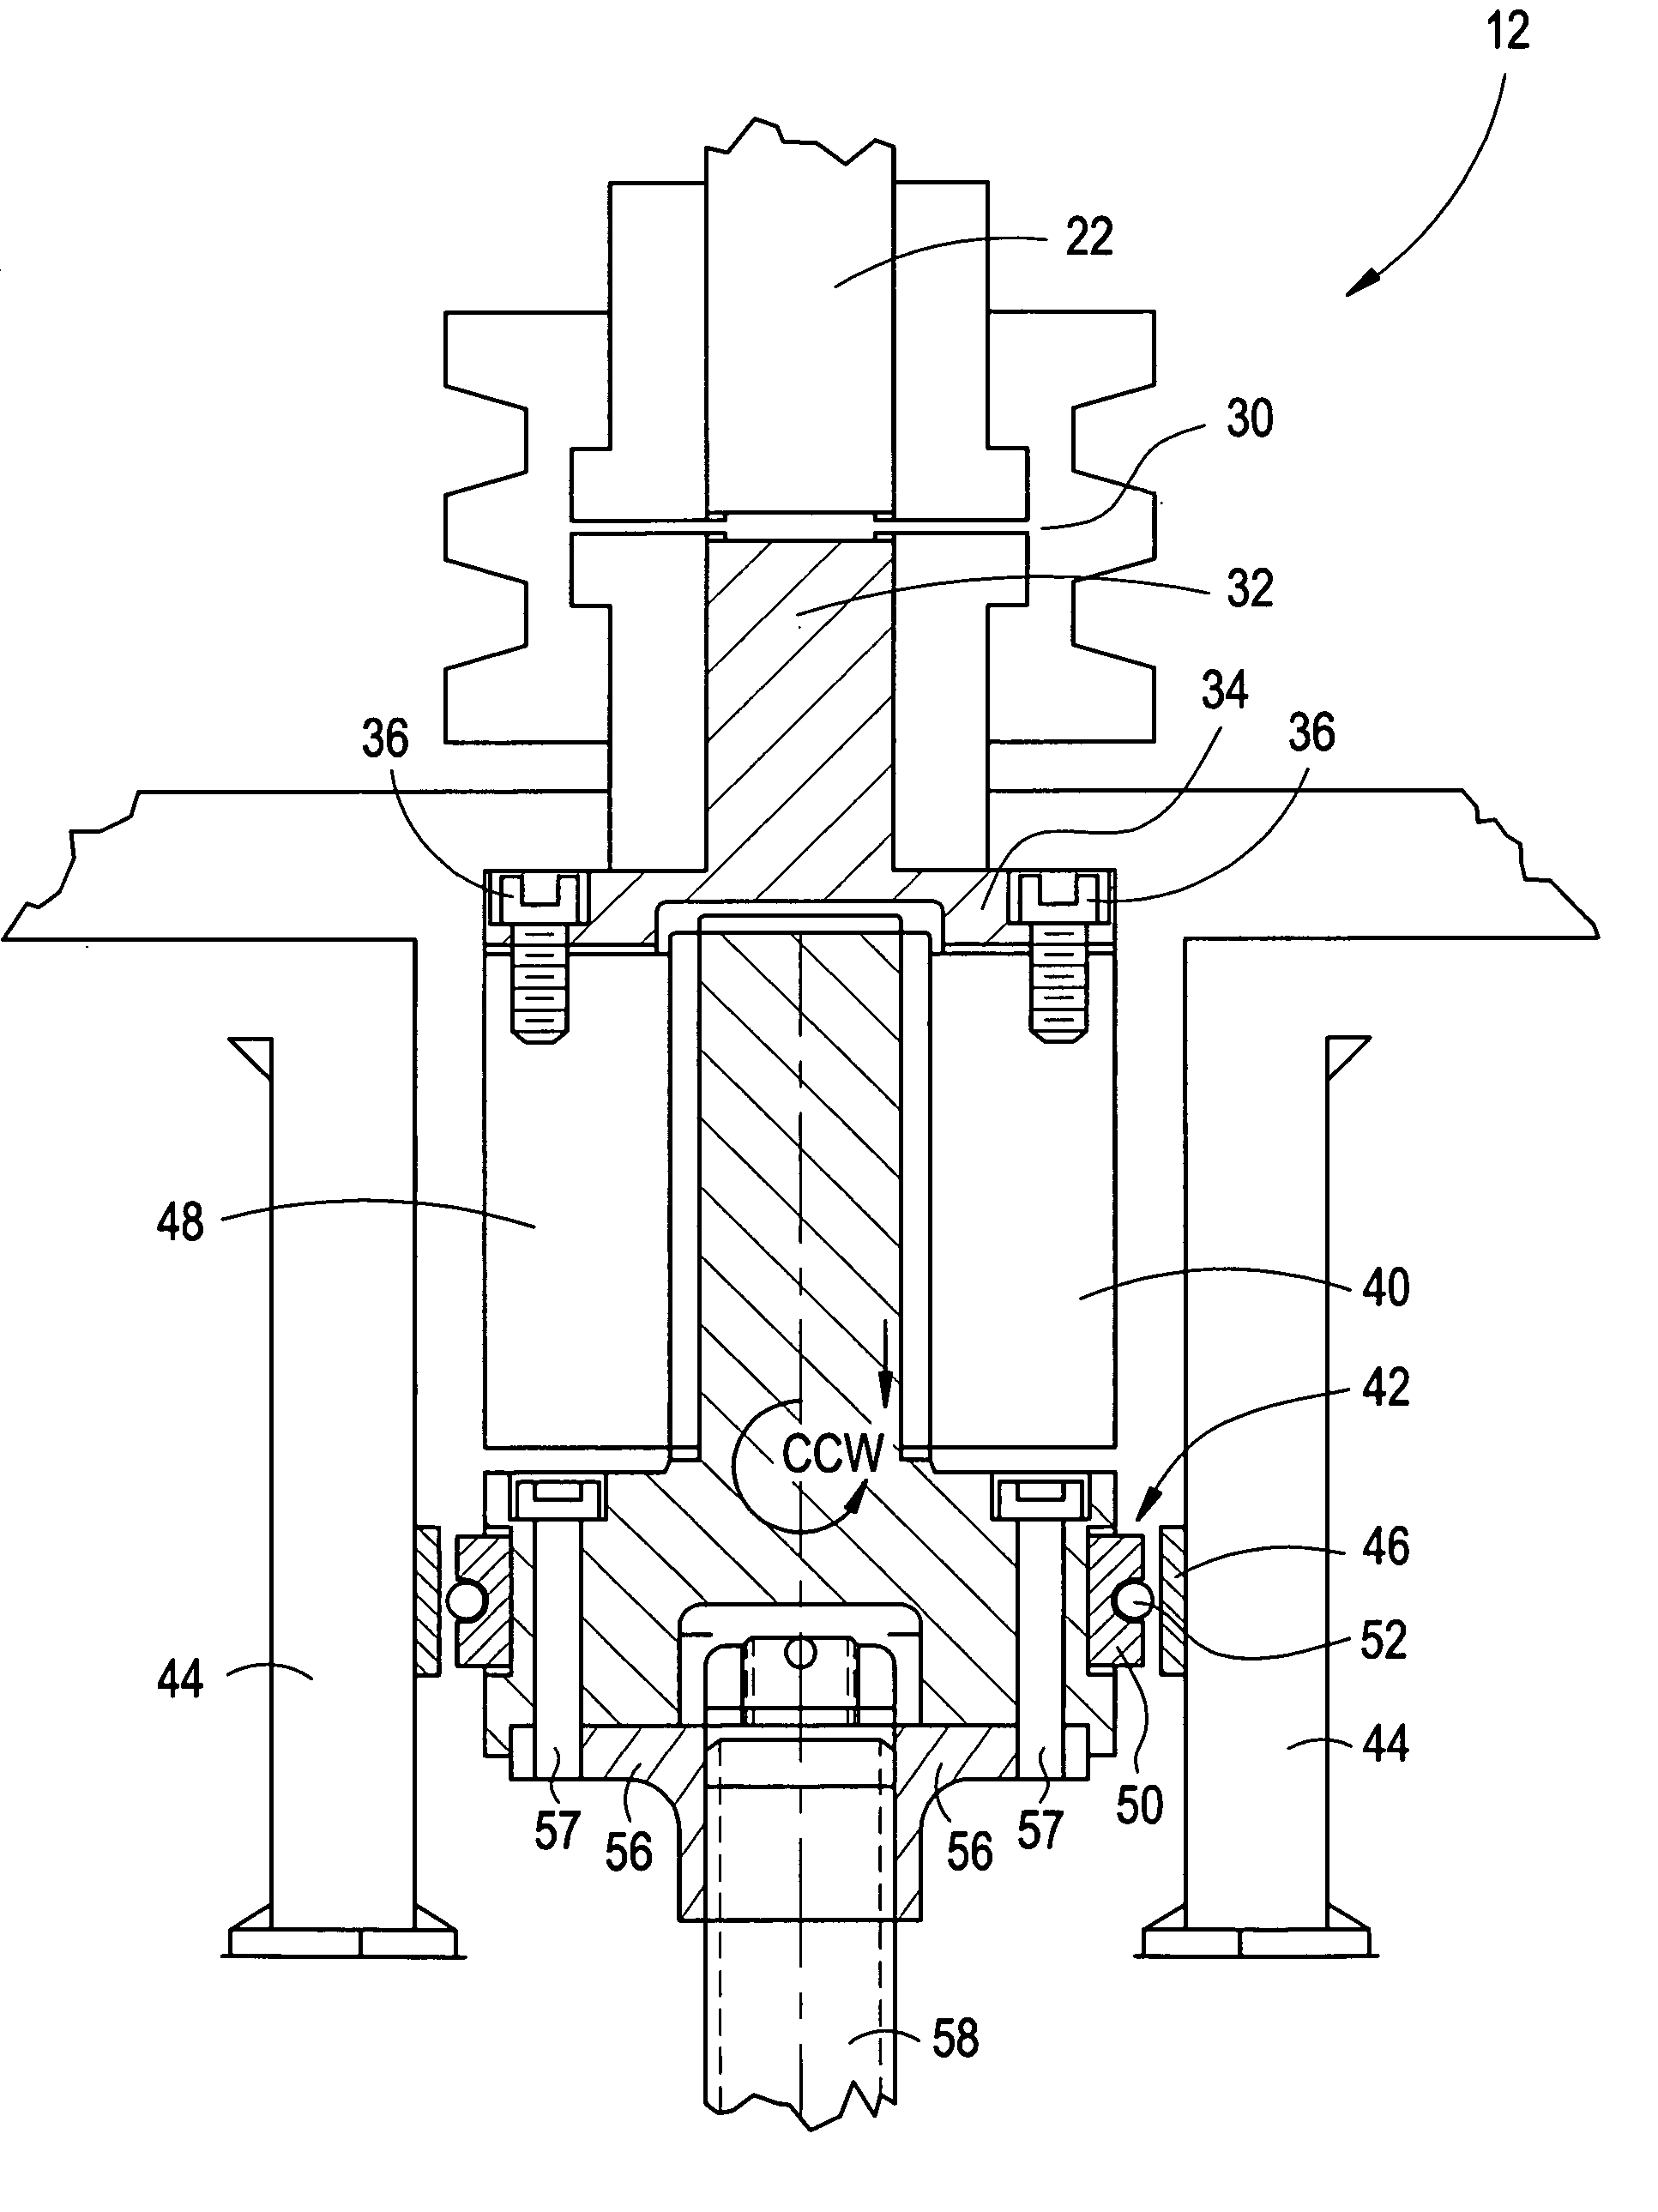 Turning gear drive system